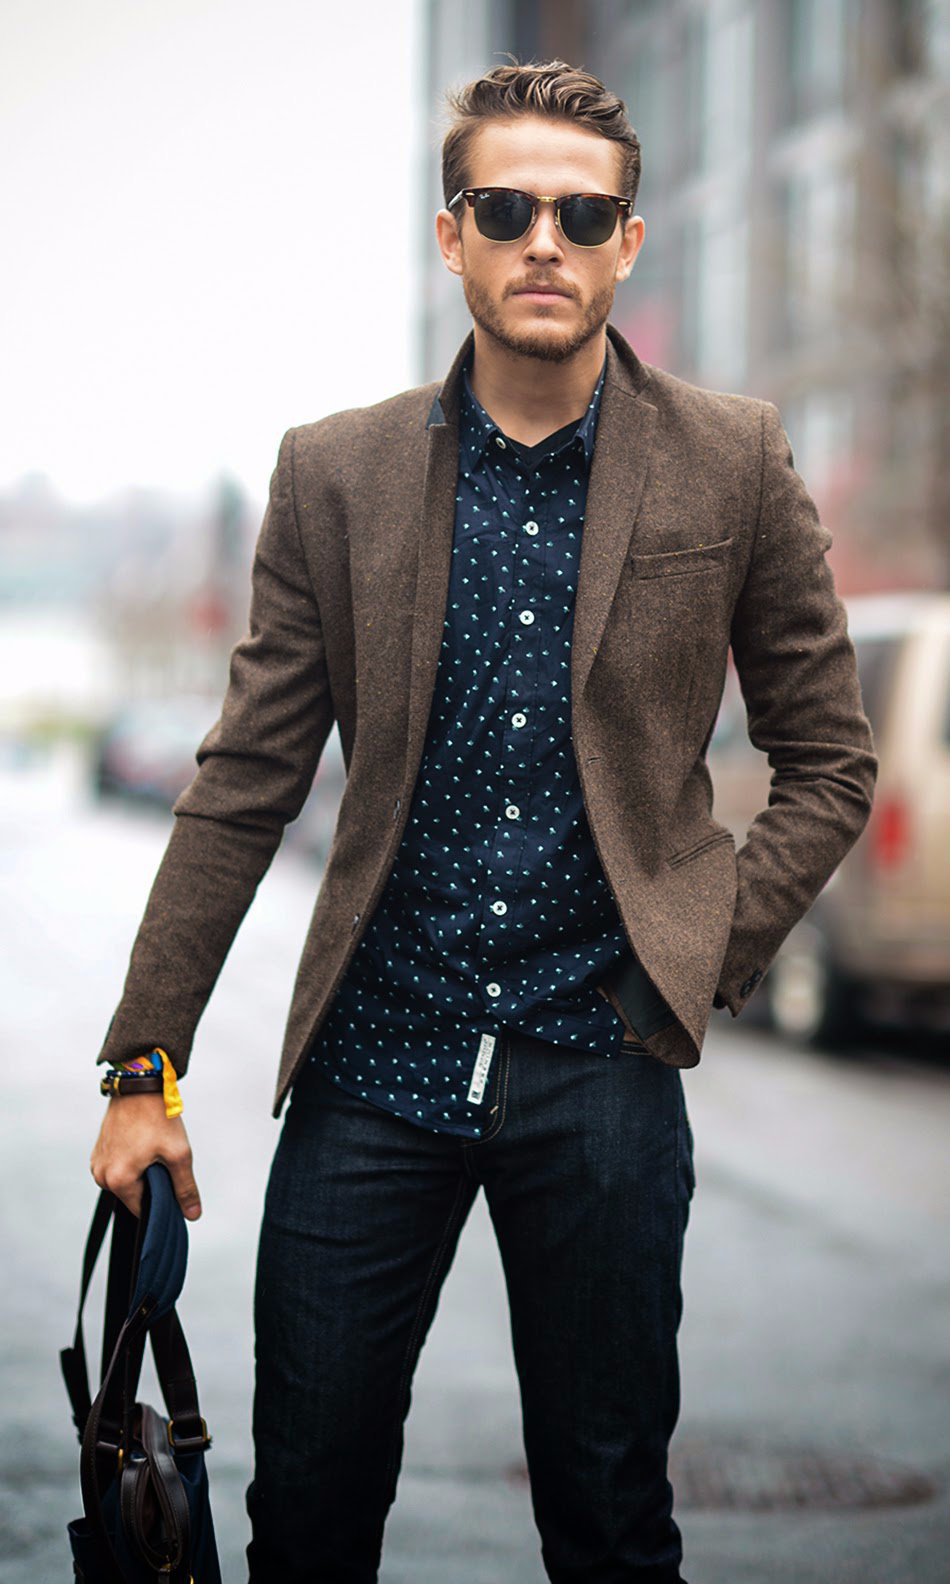 15 Must-Have Items For Men To Look Fresh And Professional -   21 mens style shirt
 ideas